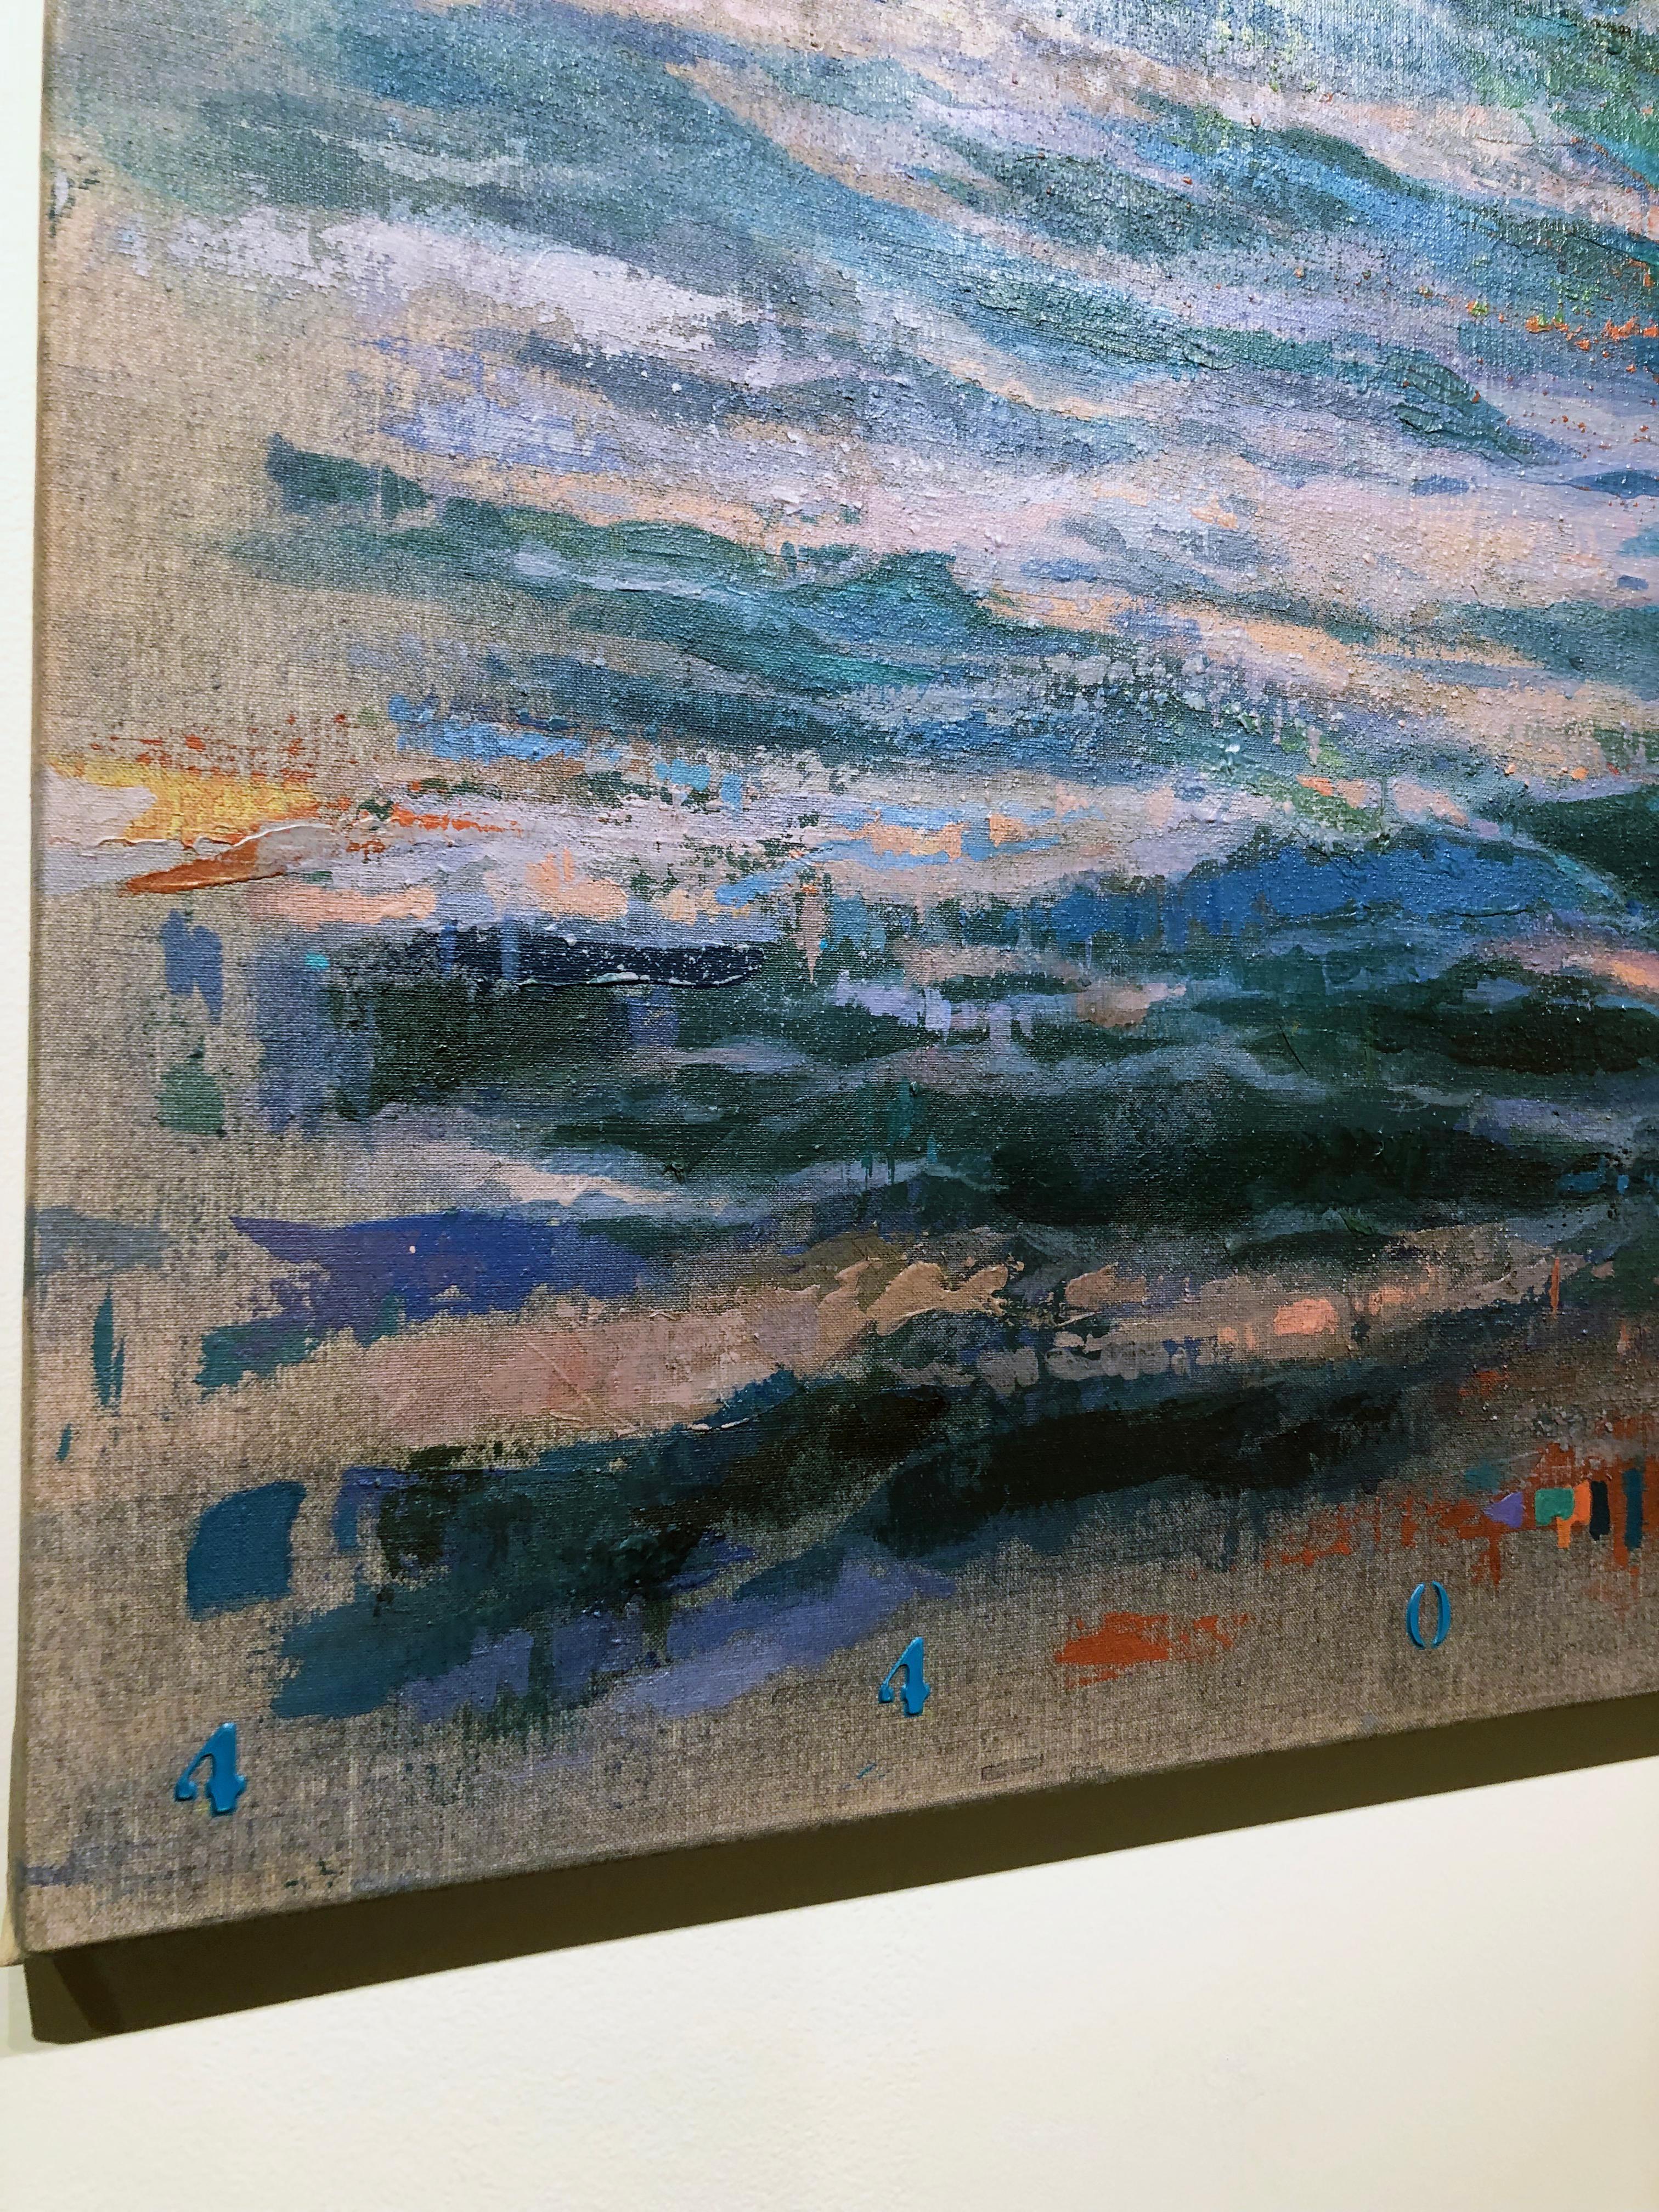 The artist uses his brush to create small abstractions of color.  But when we step back and take the painting in as a whole, the sea comes to life, becoming real.  This bottom of the painting is marked with Vidal's signature - a series of